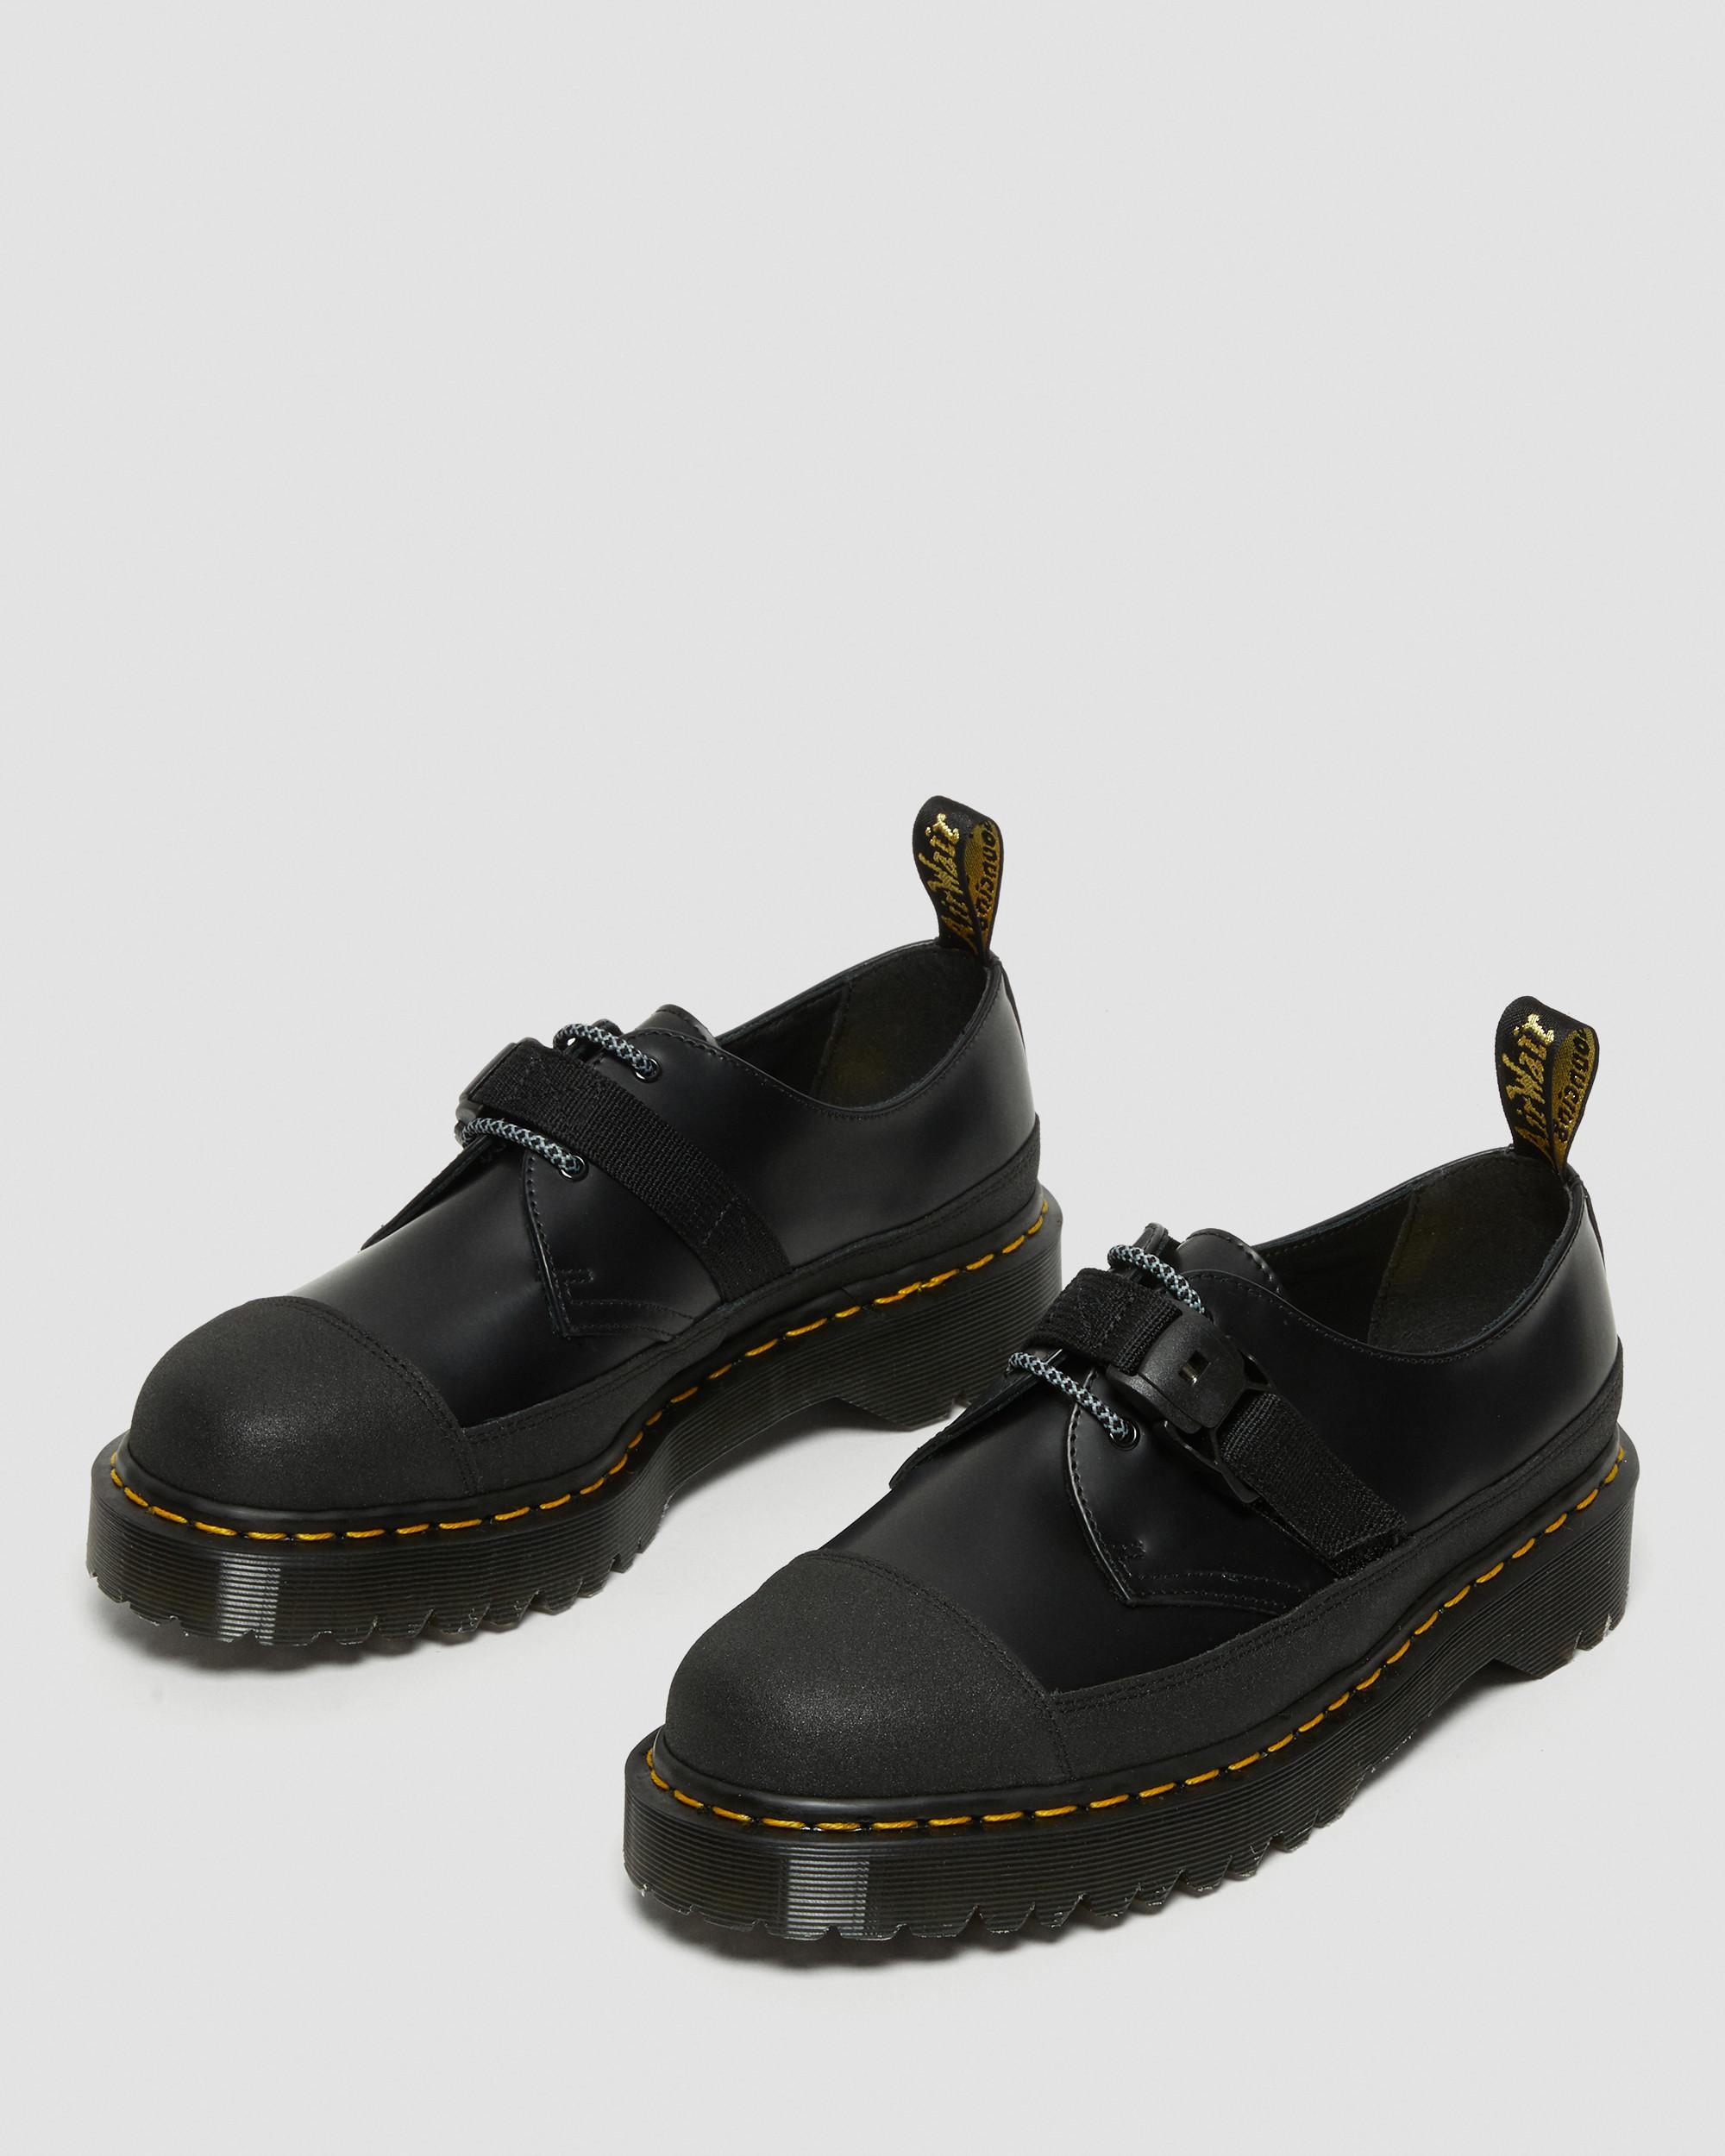 1461 Made In England Bex Tech Smooth Leather Oxford Shoes | Dr. Martens